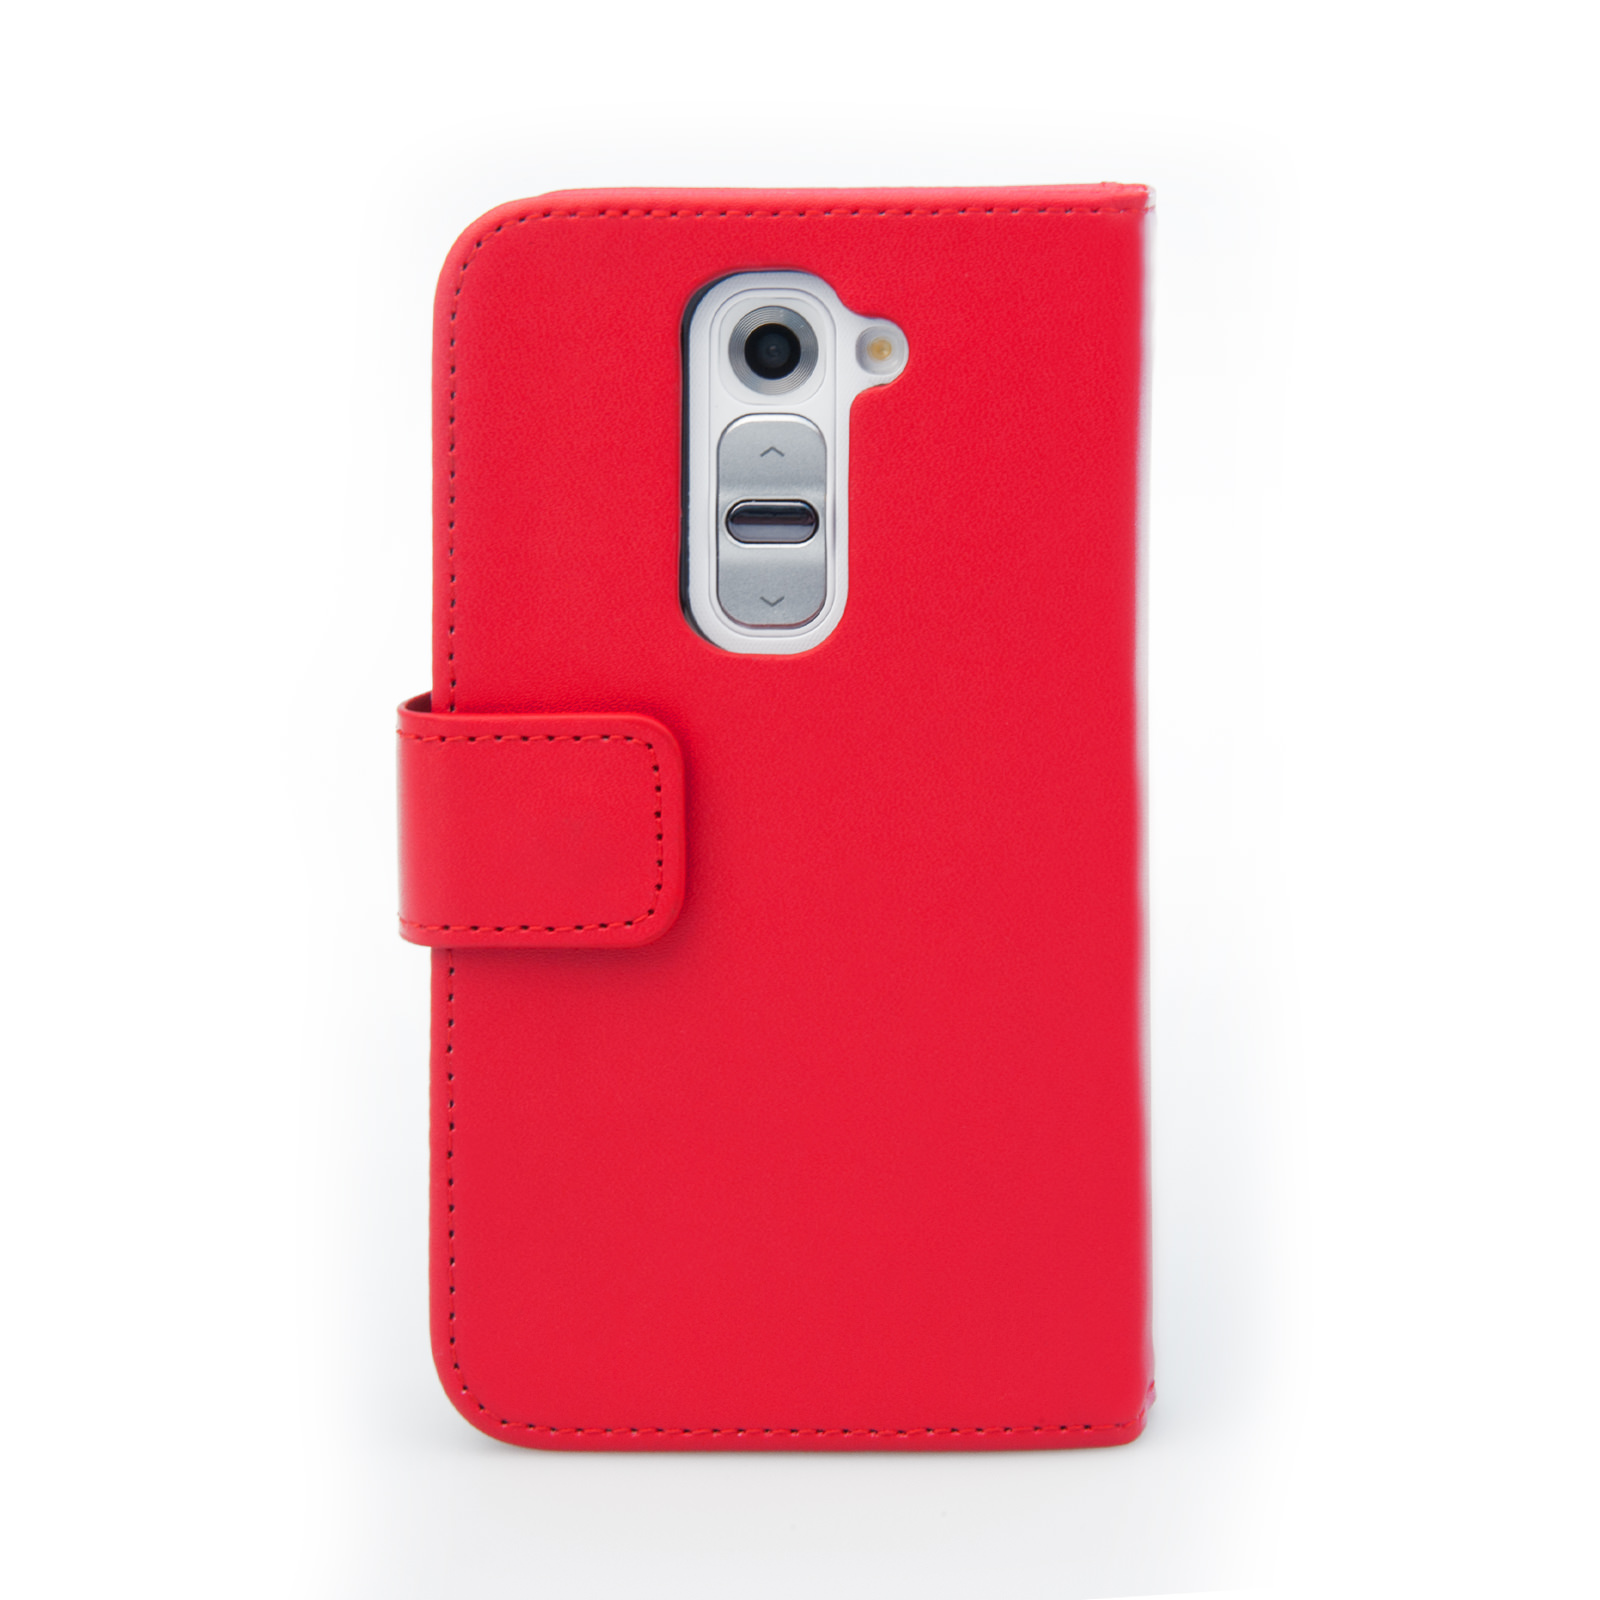 YouSave Accessories LG G2 Mini Leather-Effect Wallet Case - Red